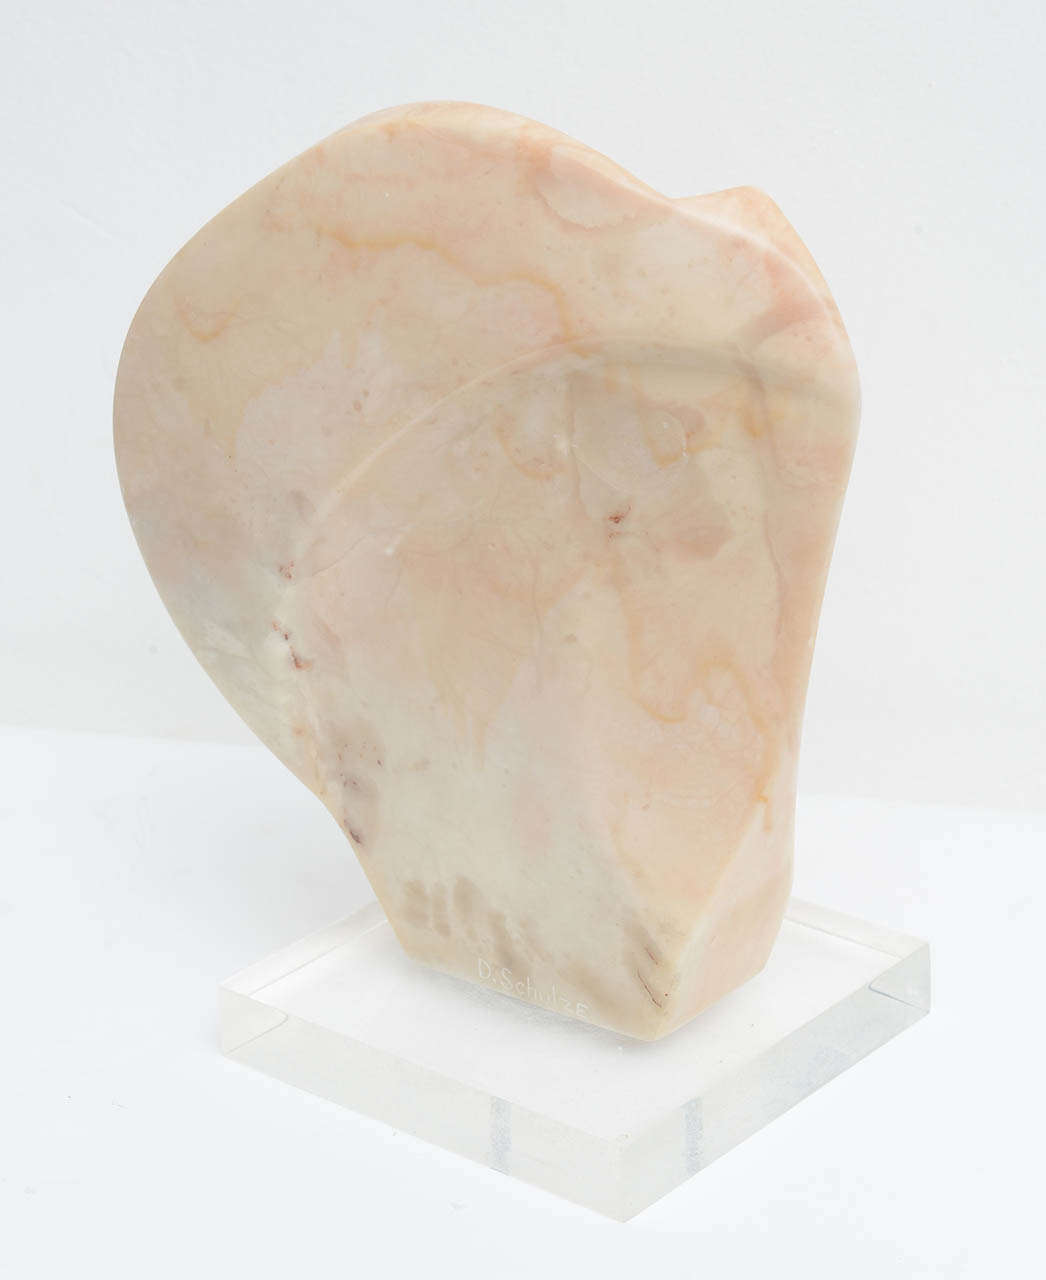 Beautiful marble abstract modernist sculpture, Signed D. Schulze. This piece dates from the 1970s. The provenance is a Palm Beach estate. We purchased several items from this collection. Others will follow in our 1stdibs listing to come. This simple